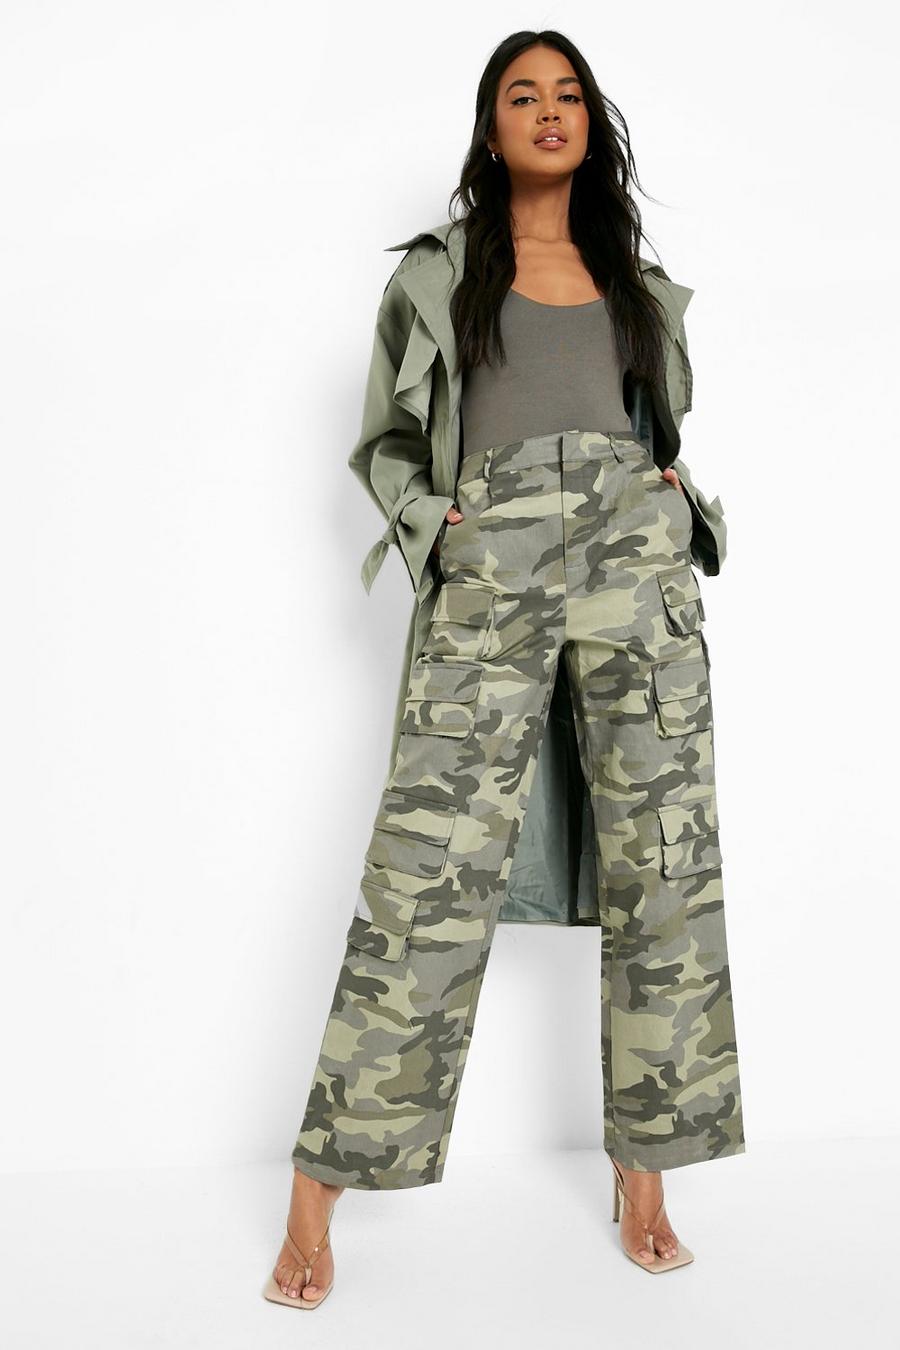 JWZUY Women's Tie Dye Camo Cargo Pants High Waisted Straight Leg Pants with  Pockets Camouflage L 